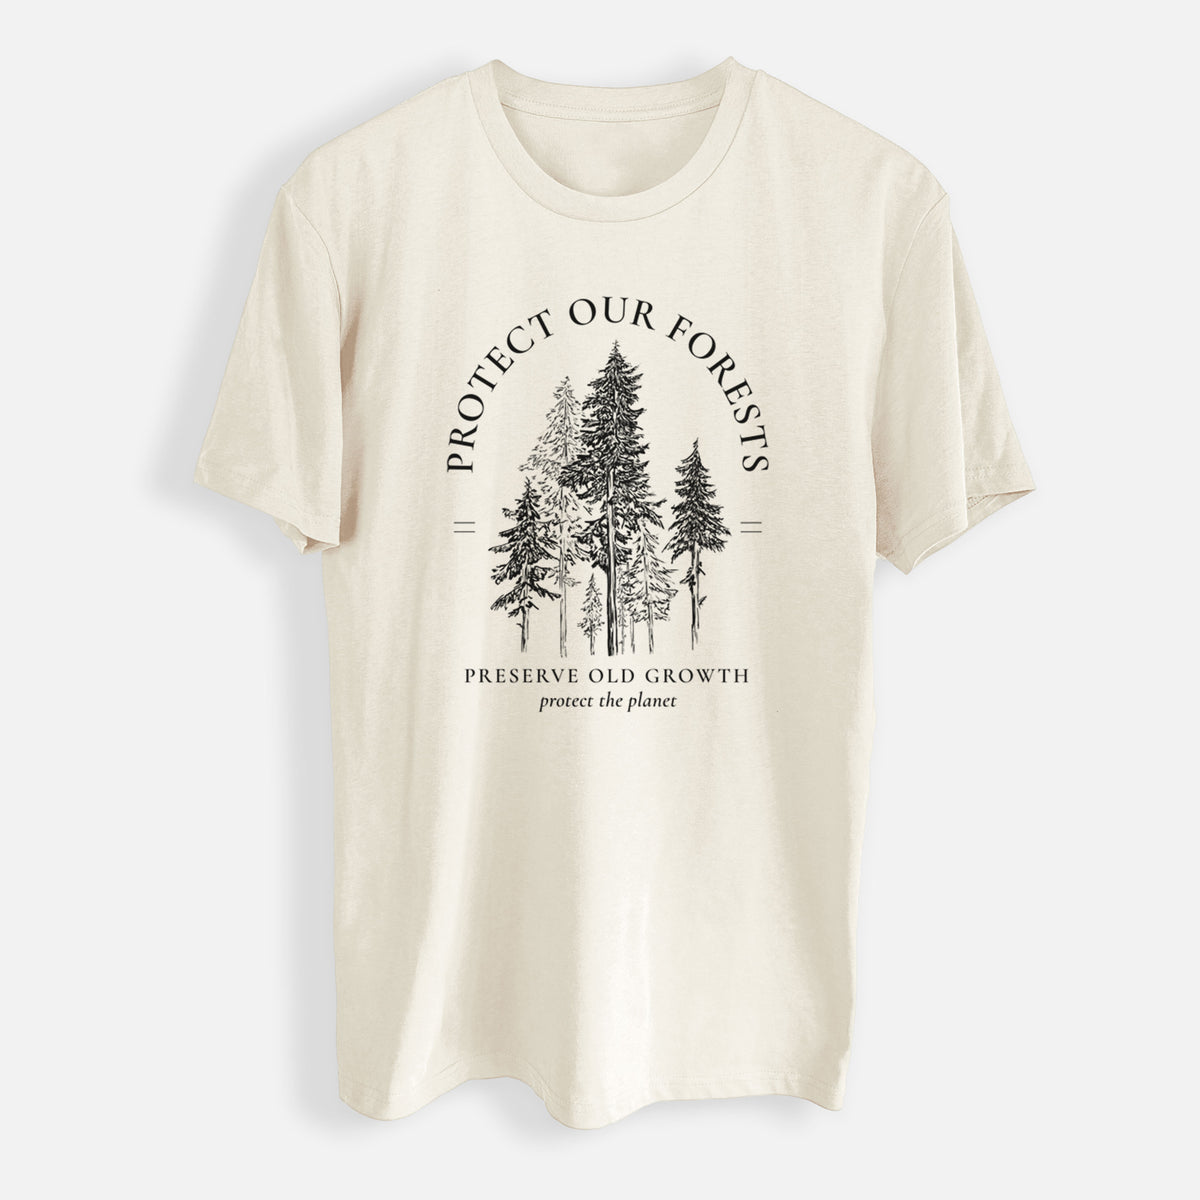 Protect our Forests - Preserve Old Growth - Mens Everyday Staple Tee